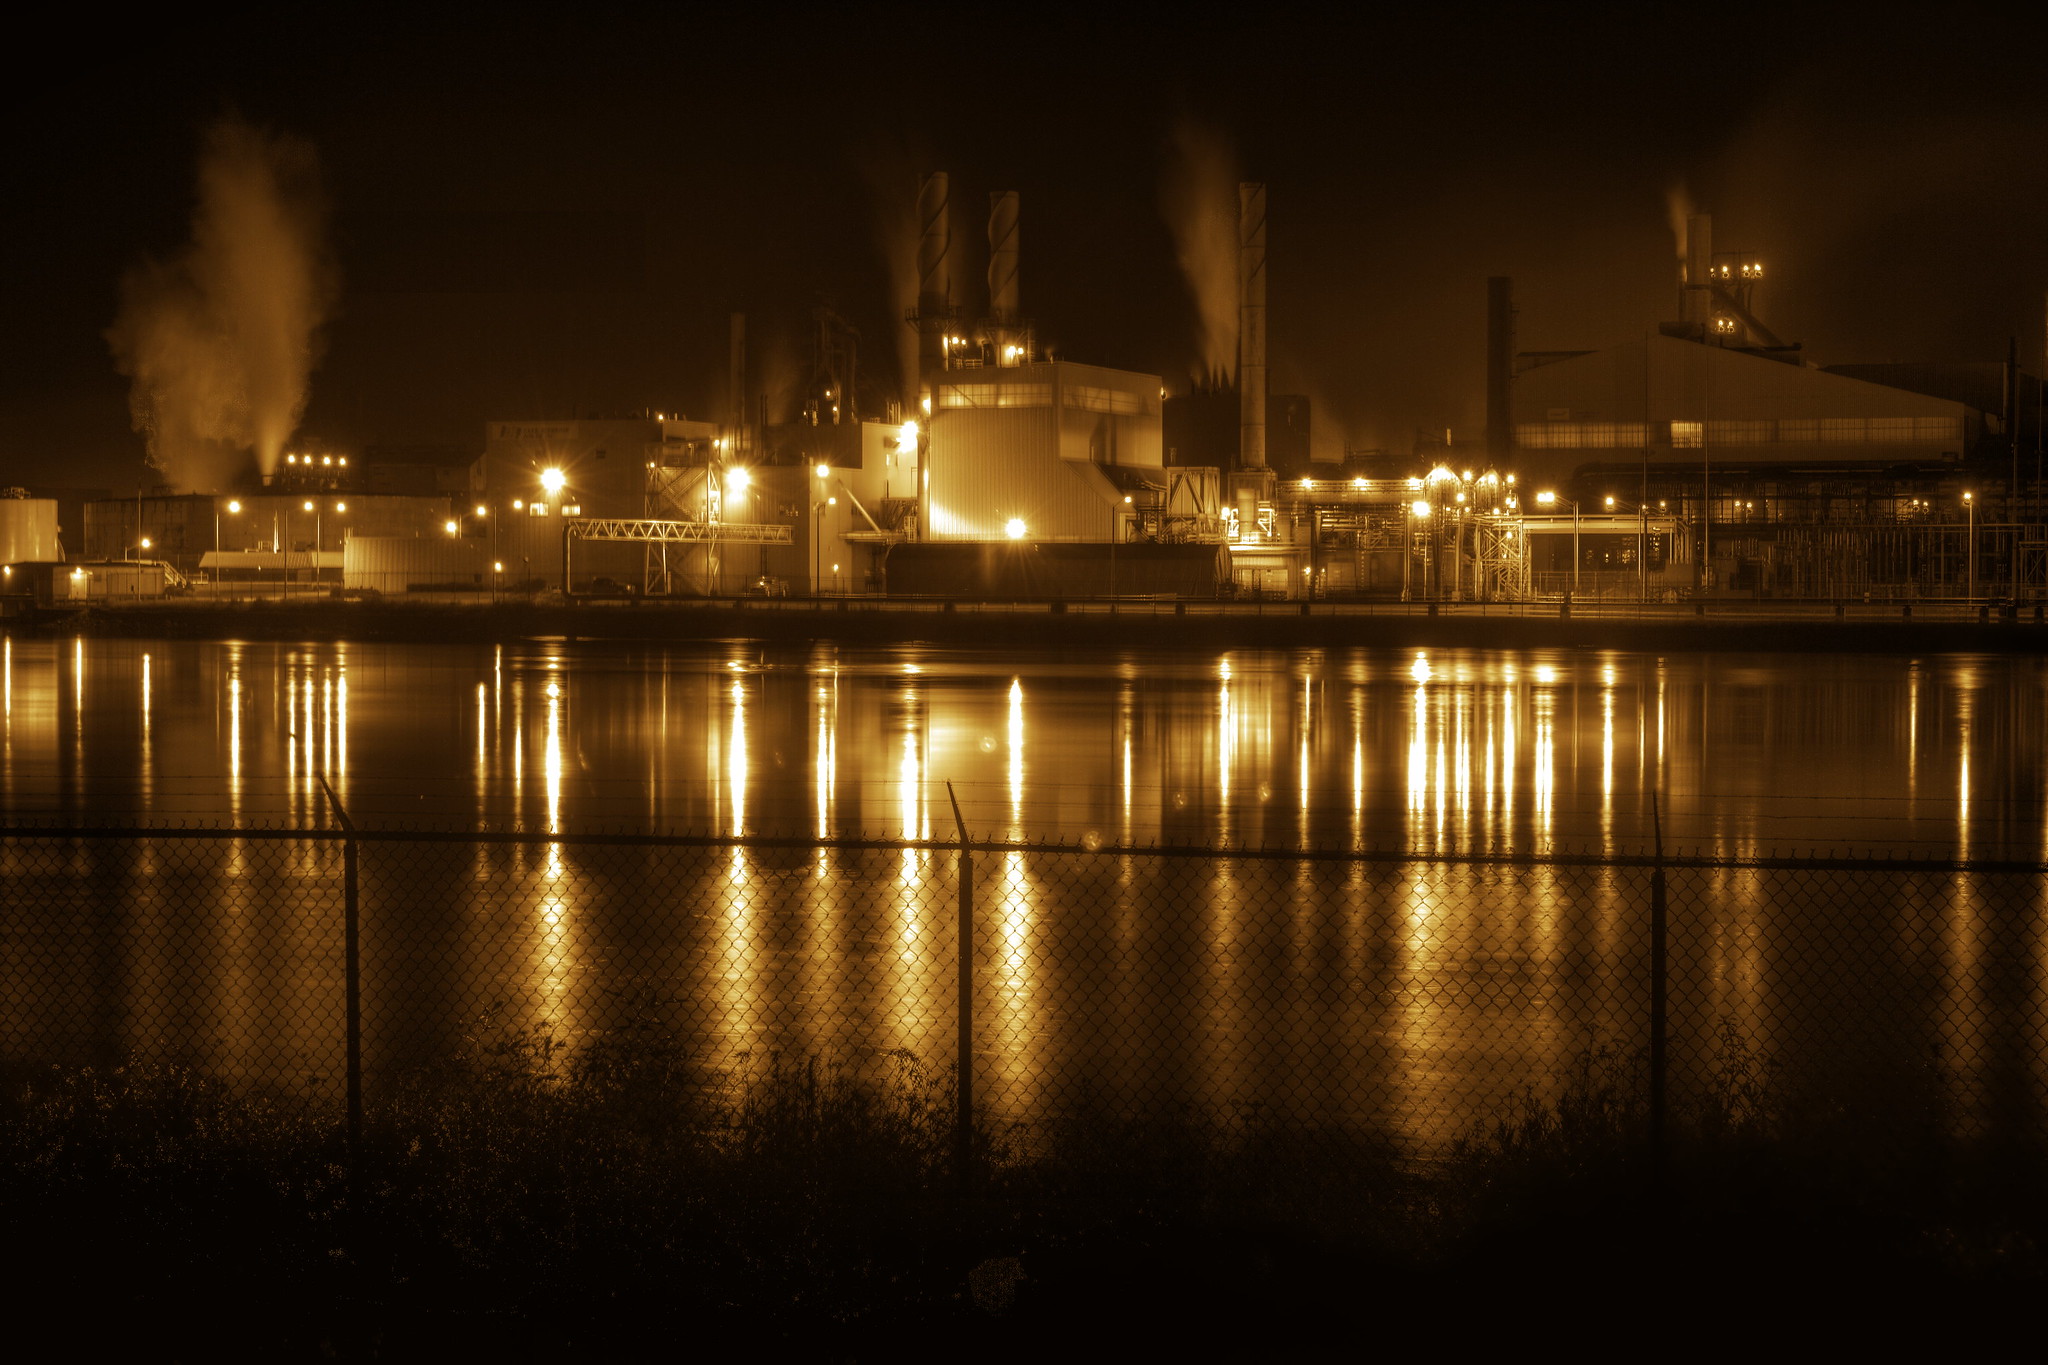 Essar Steel mill in Ontario, taking at night. A manufacturing plant lit up at night, seen from across a river.